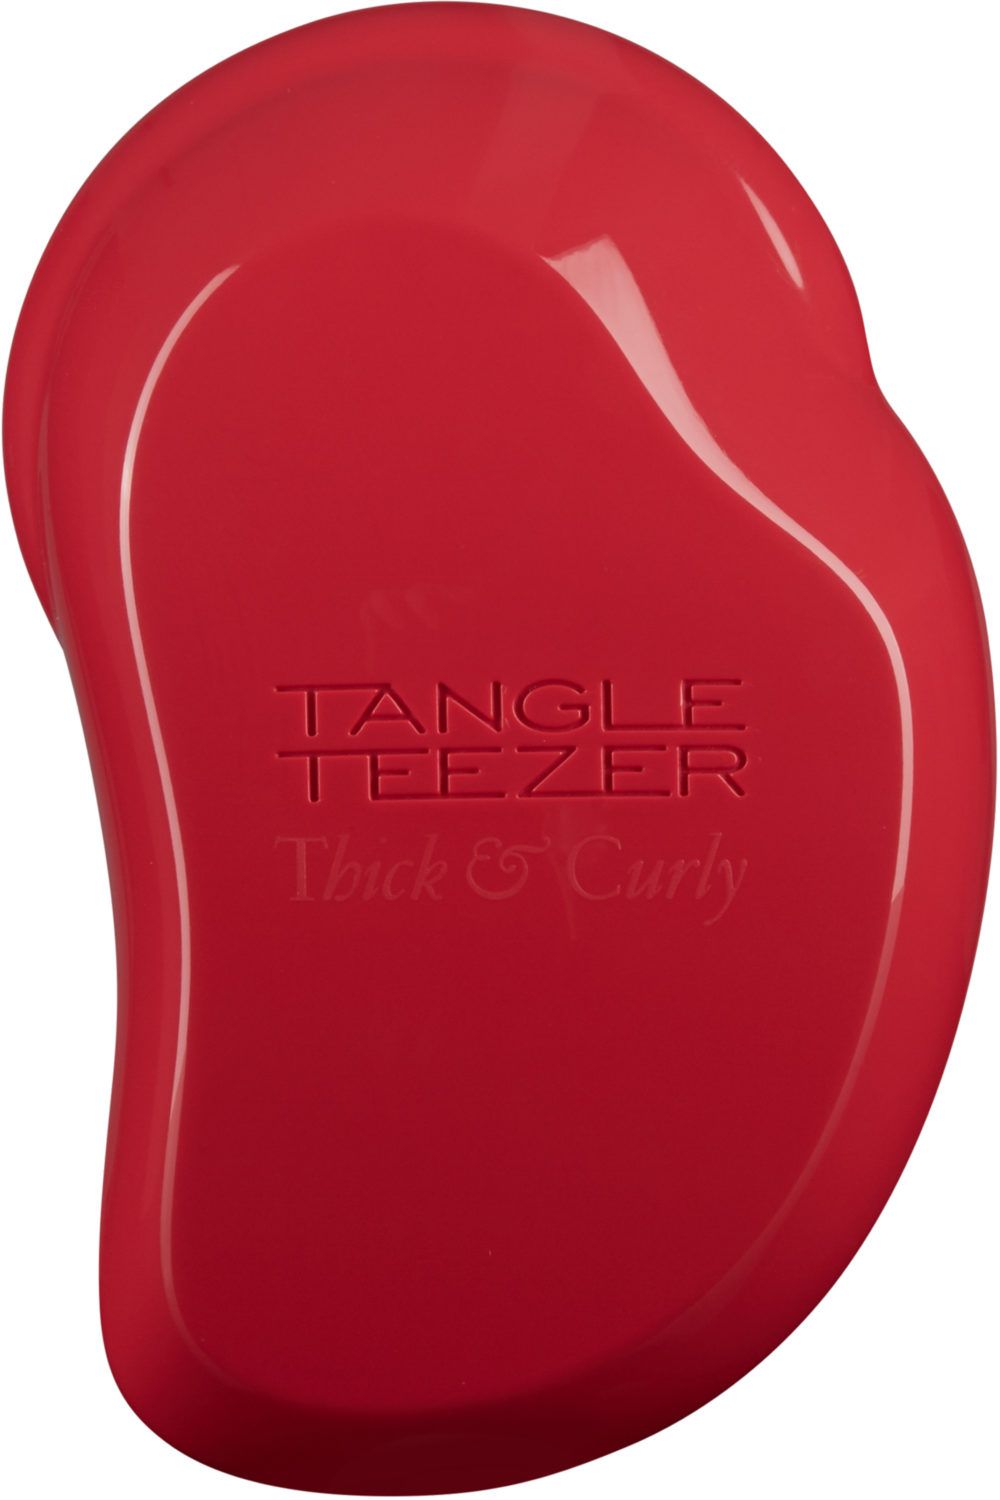 Tangle Teezer - Thick & Curly Red Salsa